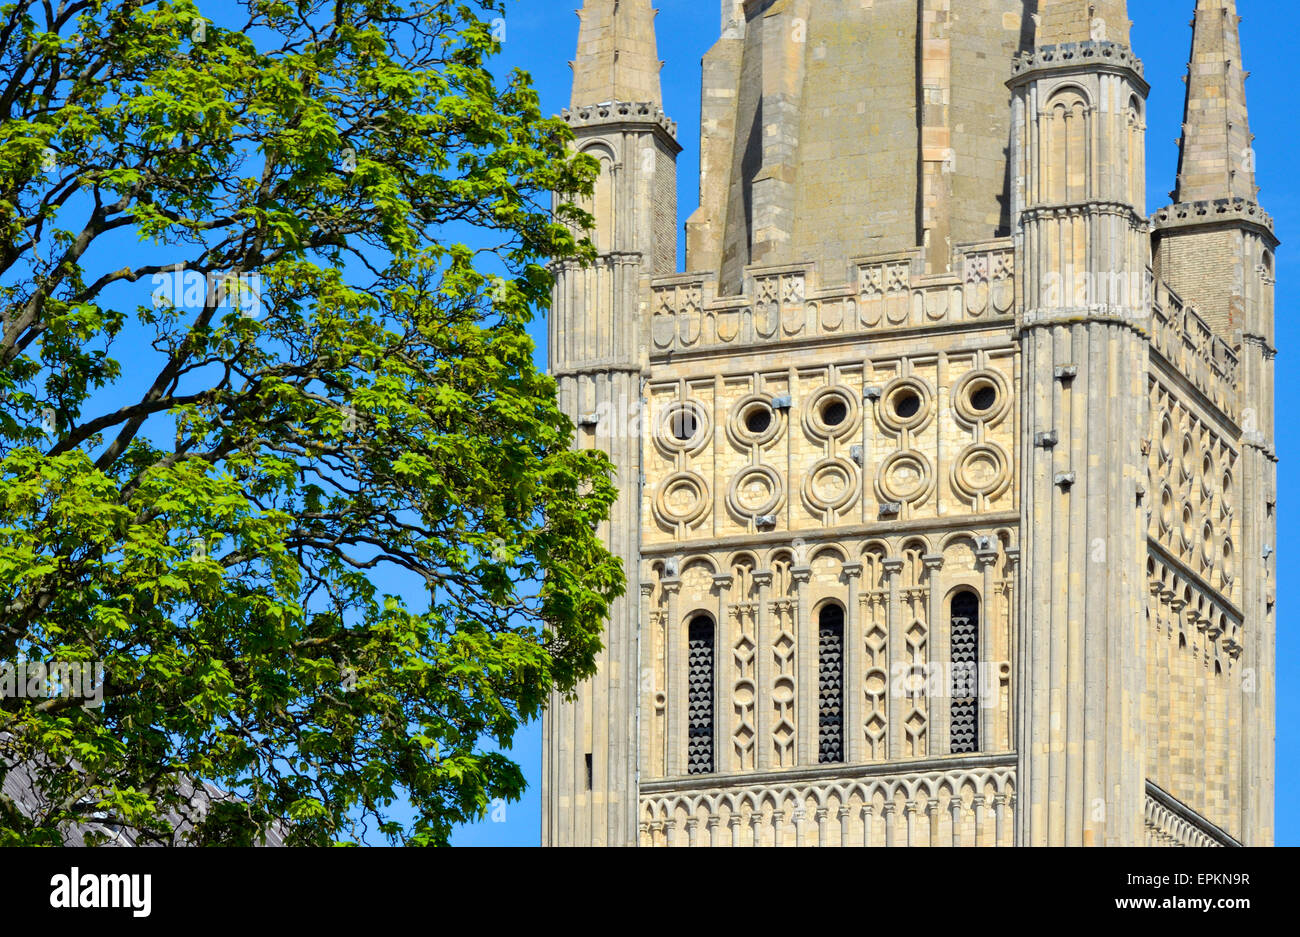 Norwich, Norfolk, Inghilterra. Norwich Cathedral (1096-1145) tower Foto Stock